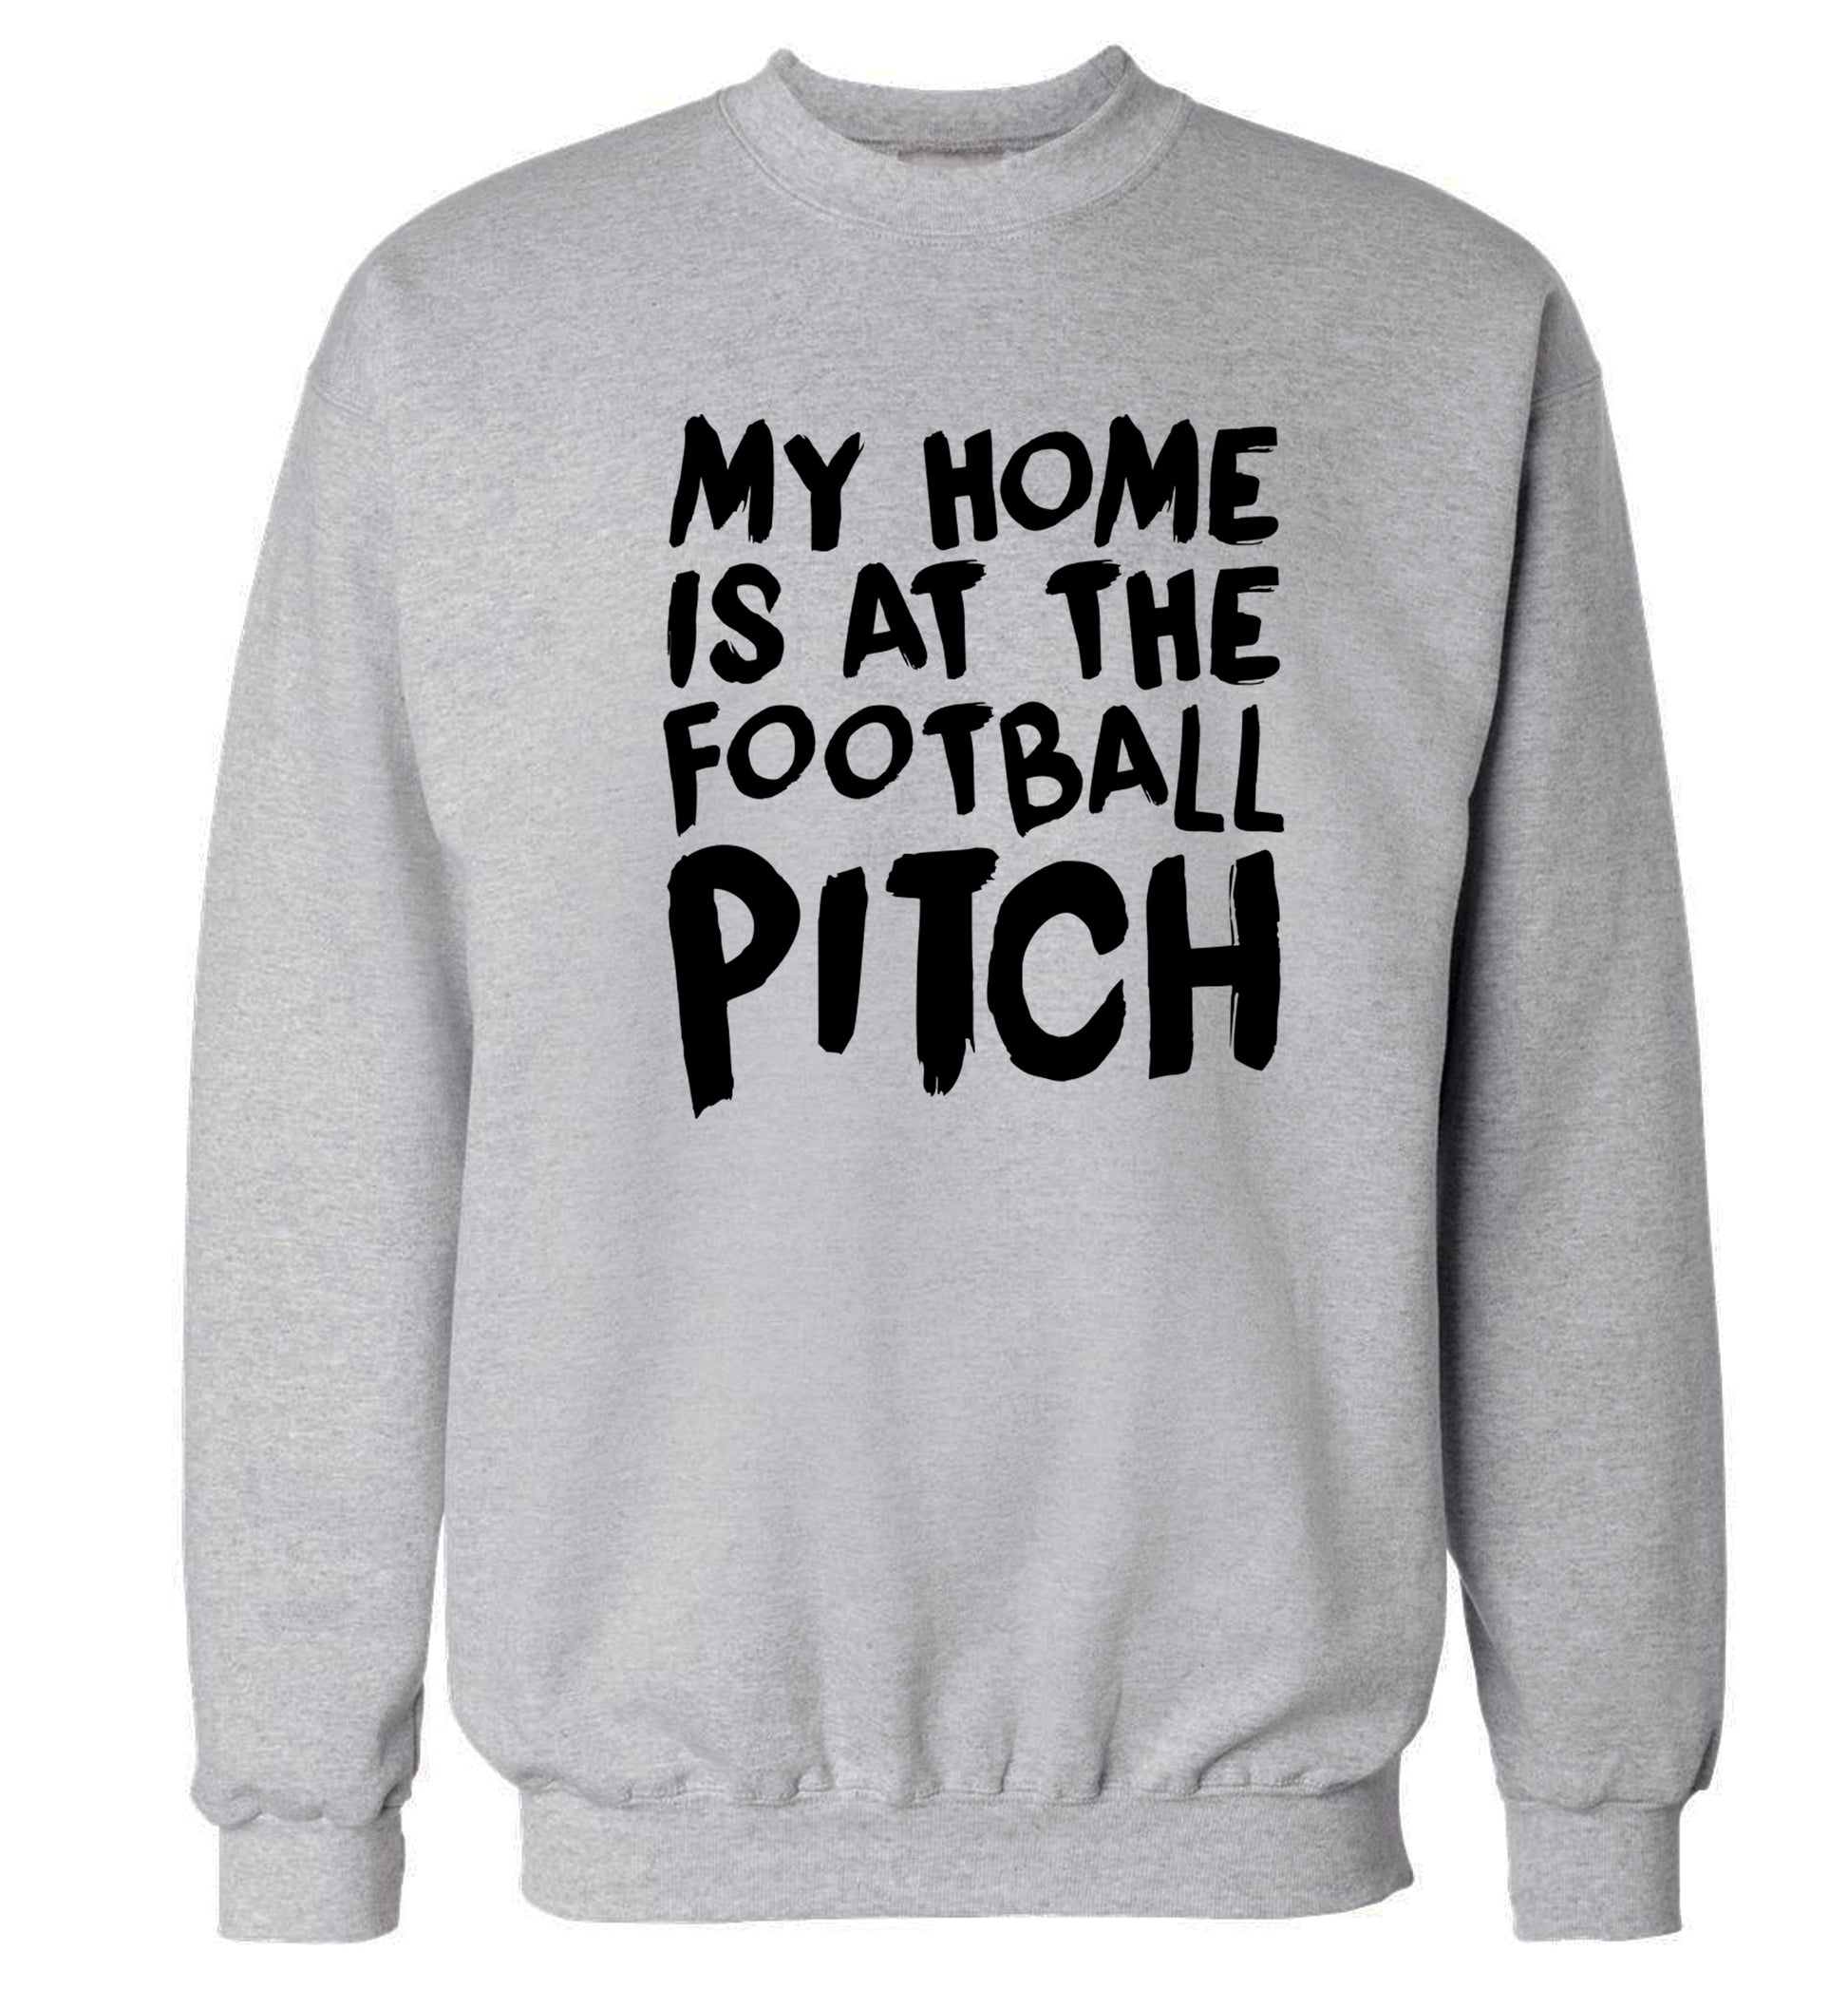 My home is at the football pitch Adult's unisex grey Sweater 2XL